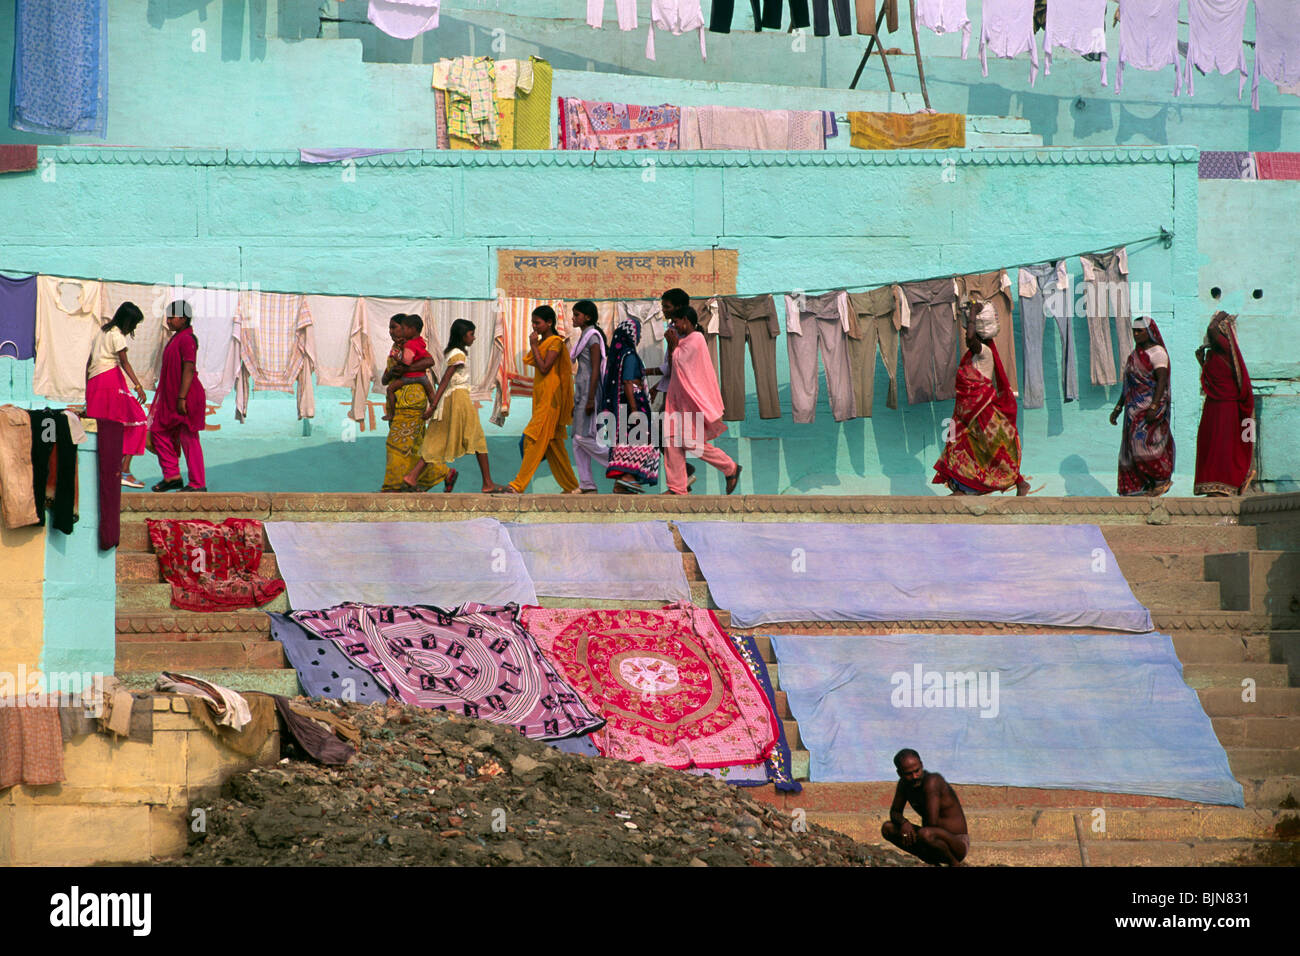 India, Varanasi, Ganges river, laundry, people drying clothes on Ganges river steps Stock Photo